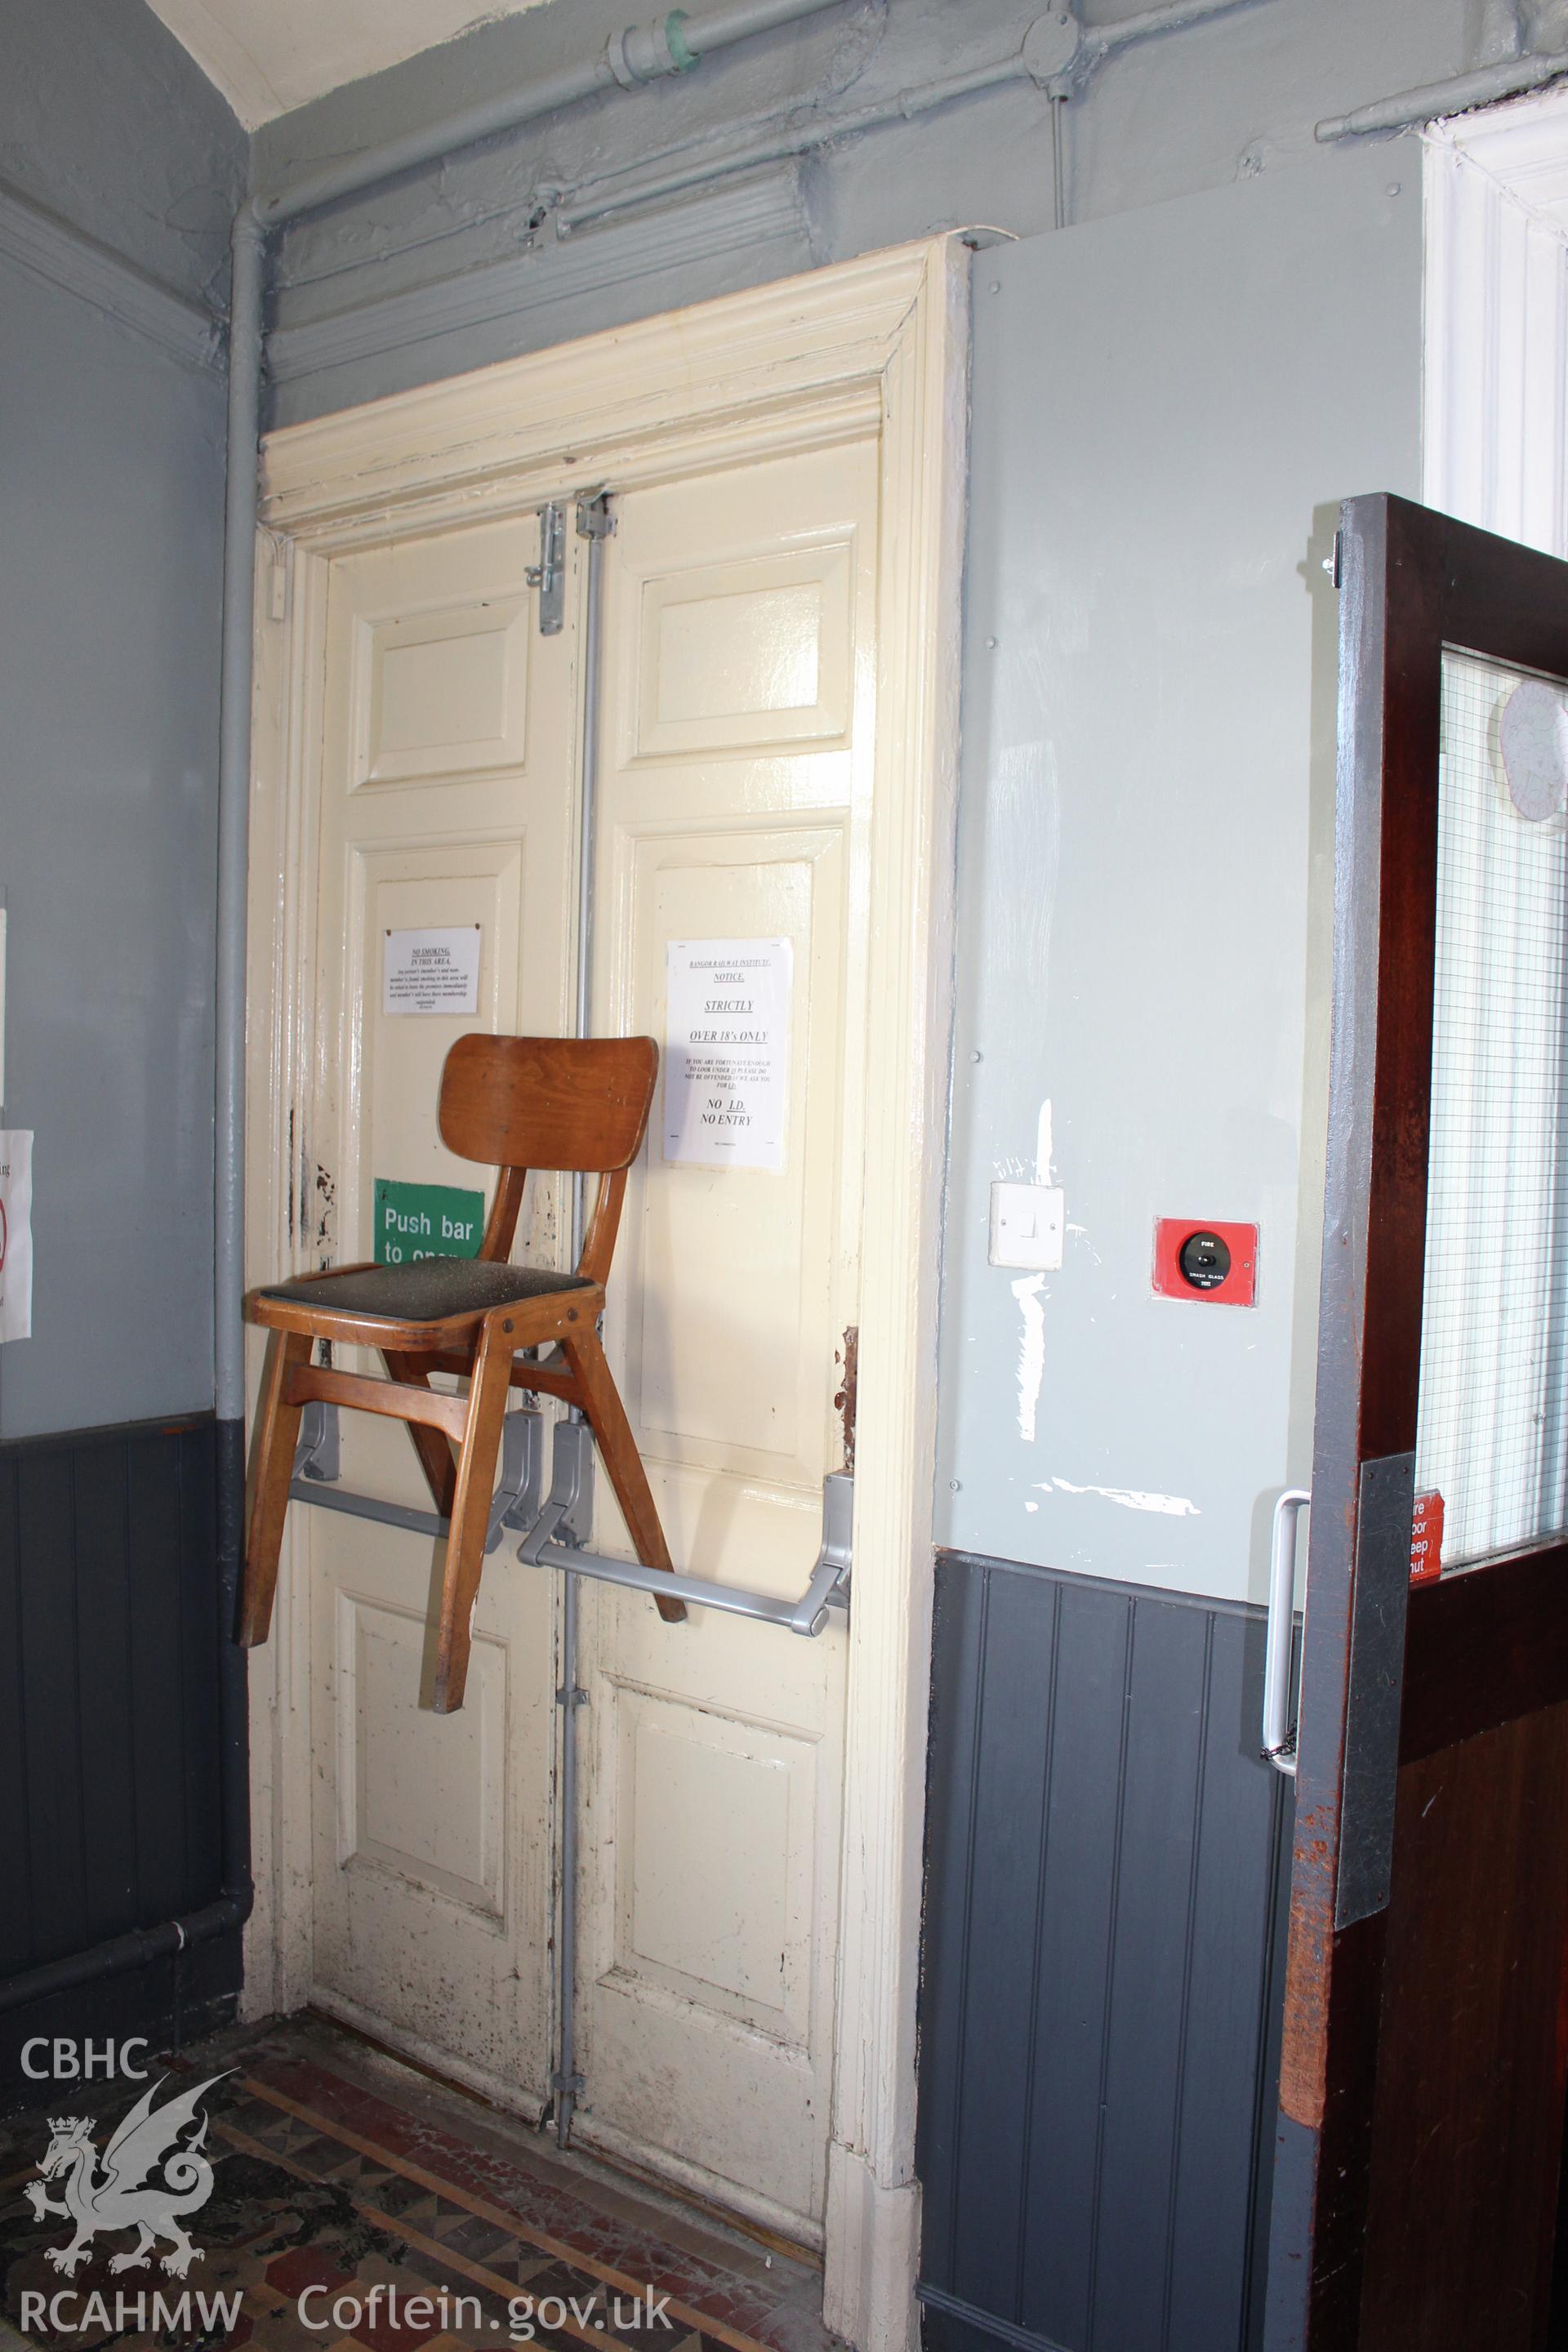 Interior view of fire exit at the Railway Institute, Bangor. Photographed during survey conducted by Sue Fielding for the RCAHMW on 4th April 2016.